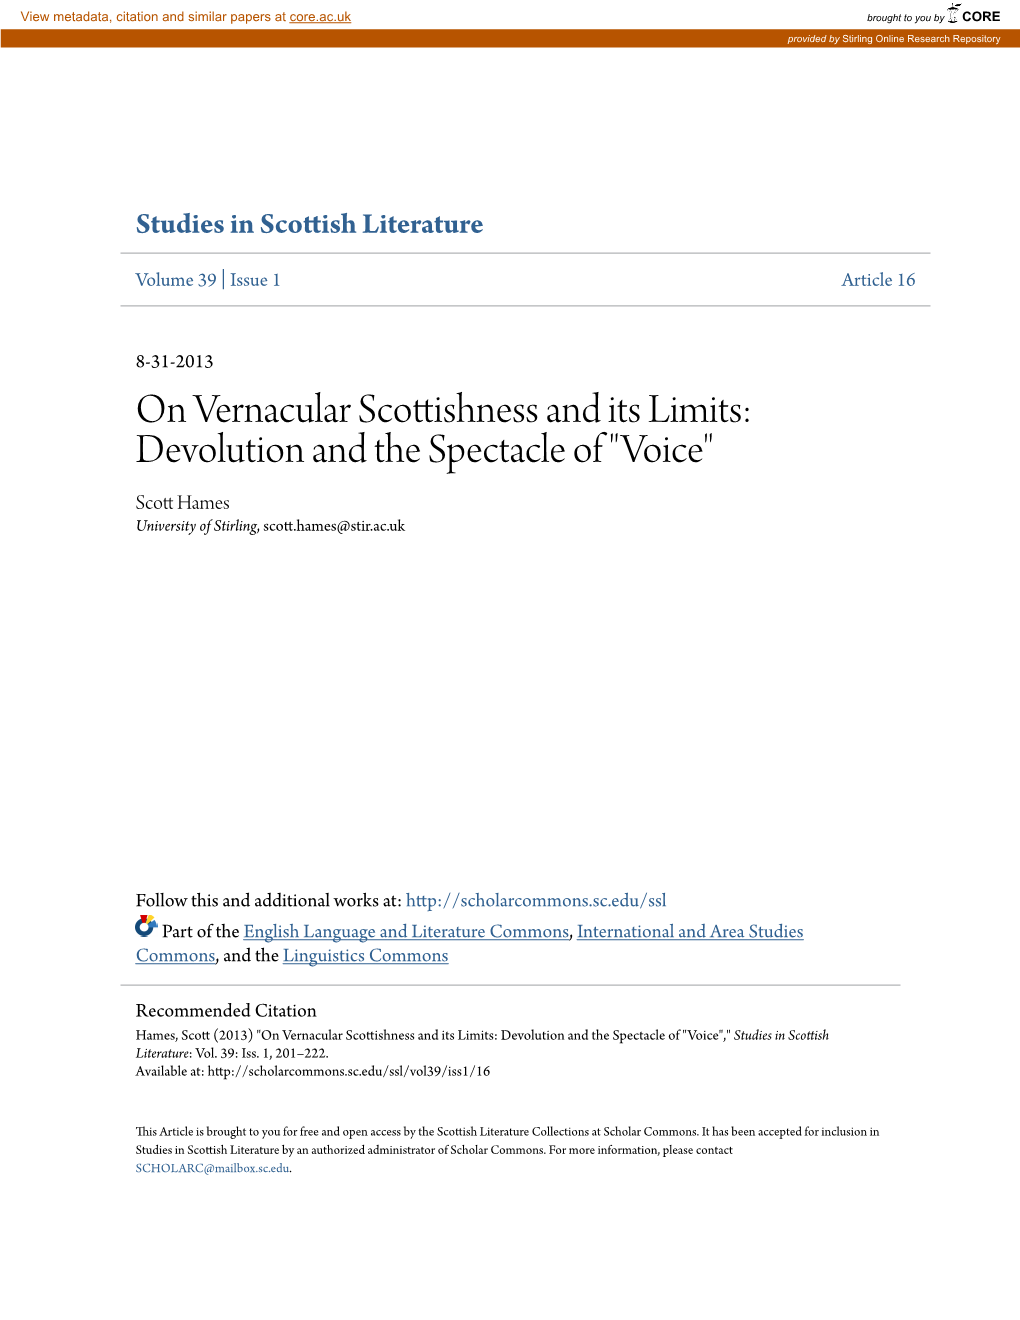 On Vernacular Scottishness and Its Limits: Devolution and the Spectacle of "Voice" Scott Ah Mes University of Stirling, Scott.Hames@Stir.Ac.Uk